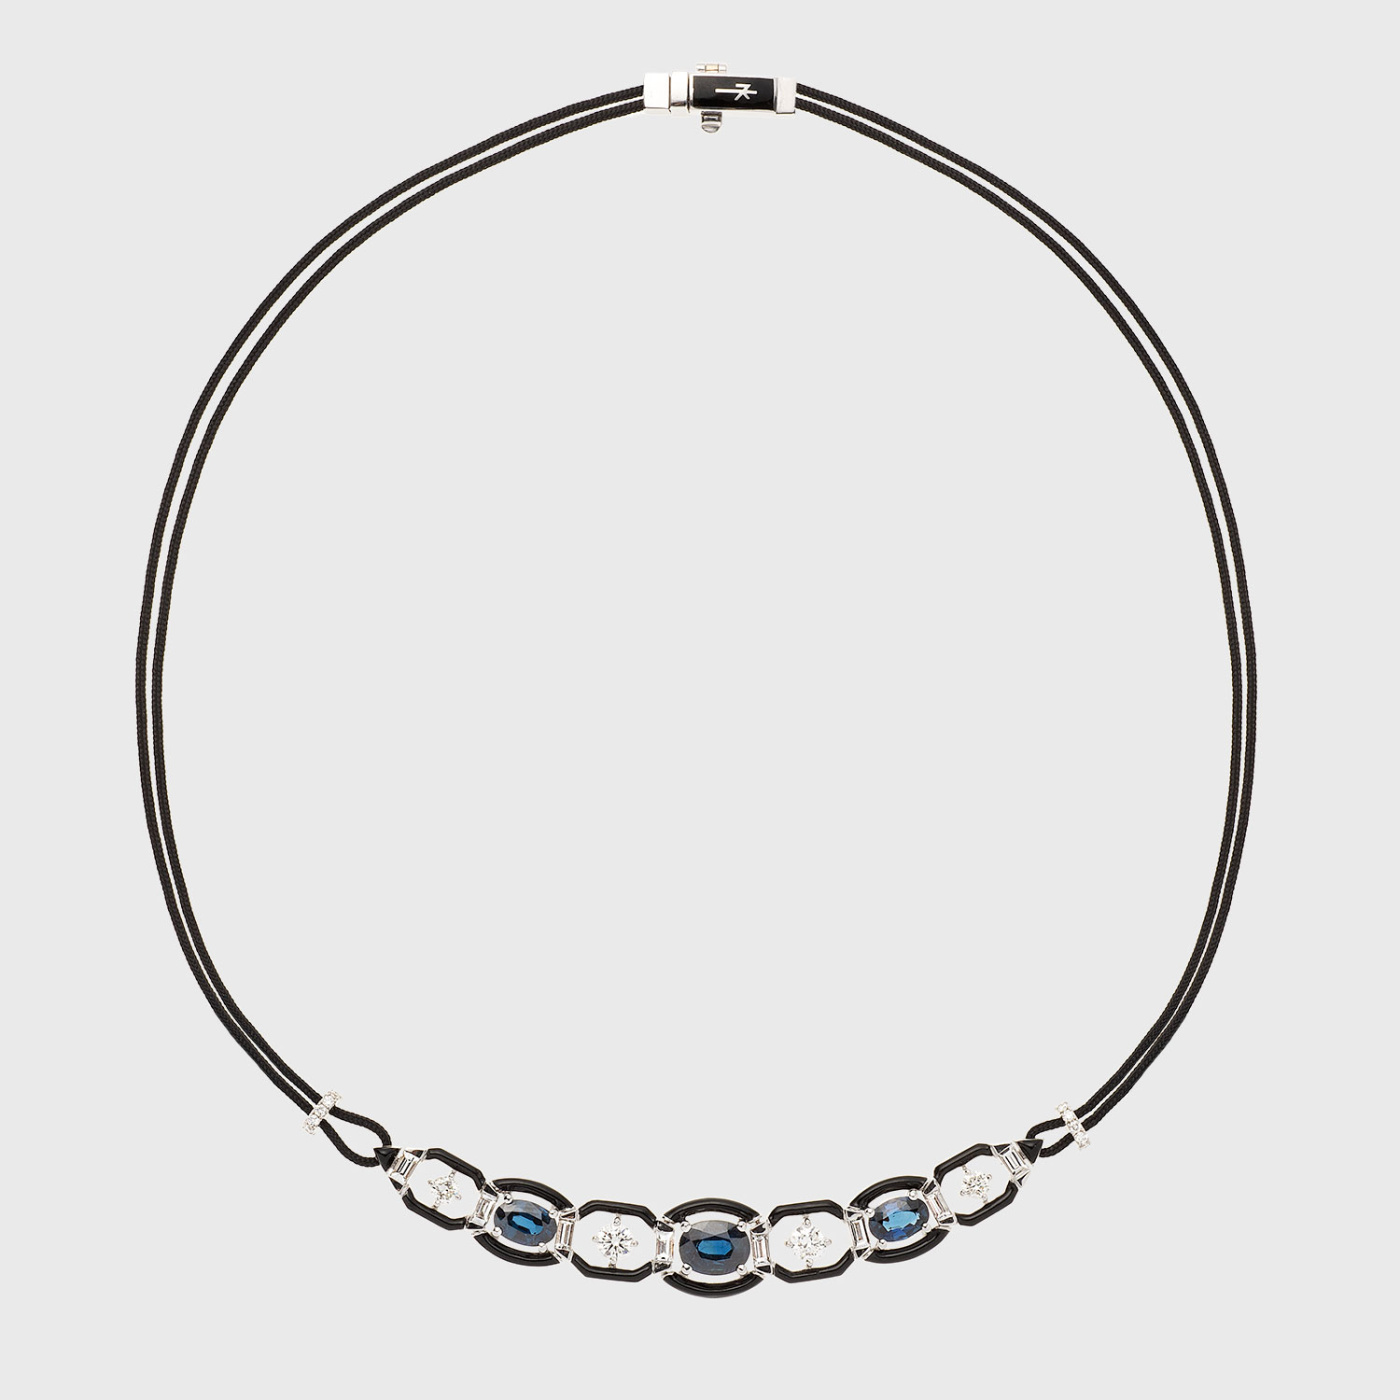 White gold cord necklace with blue sapphires, white diamonds and black enamel